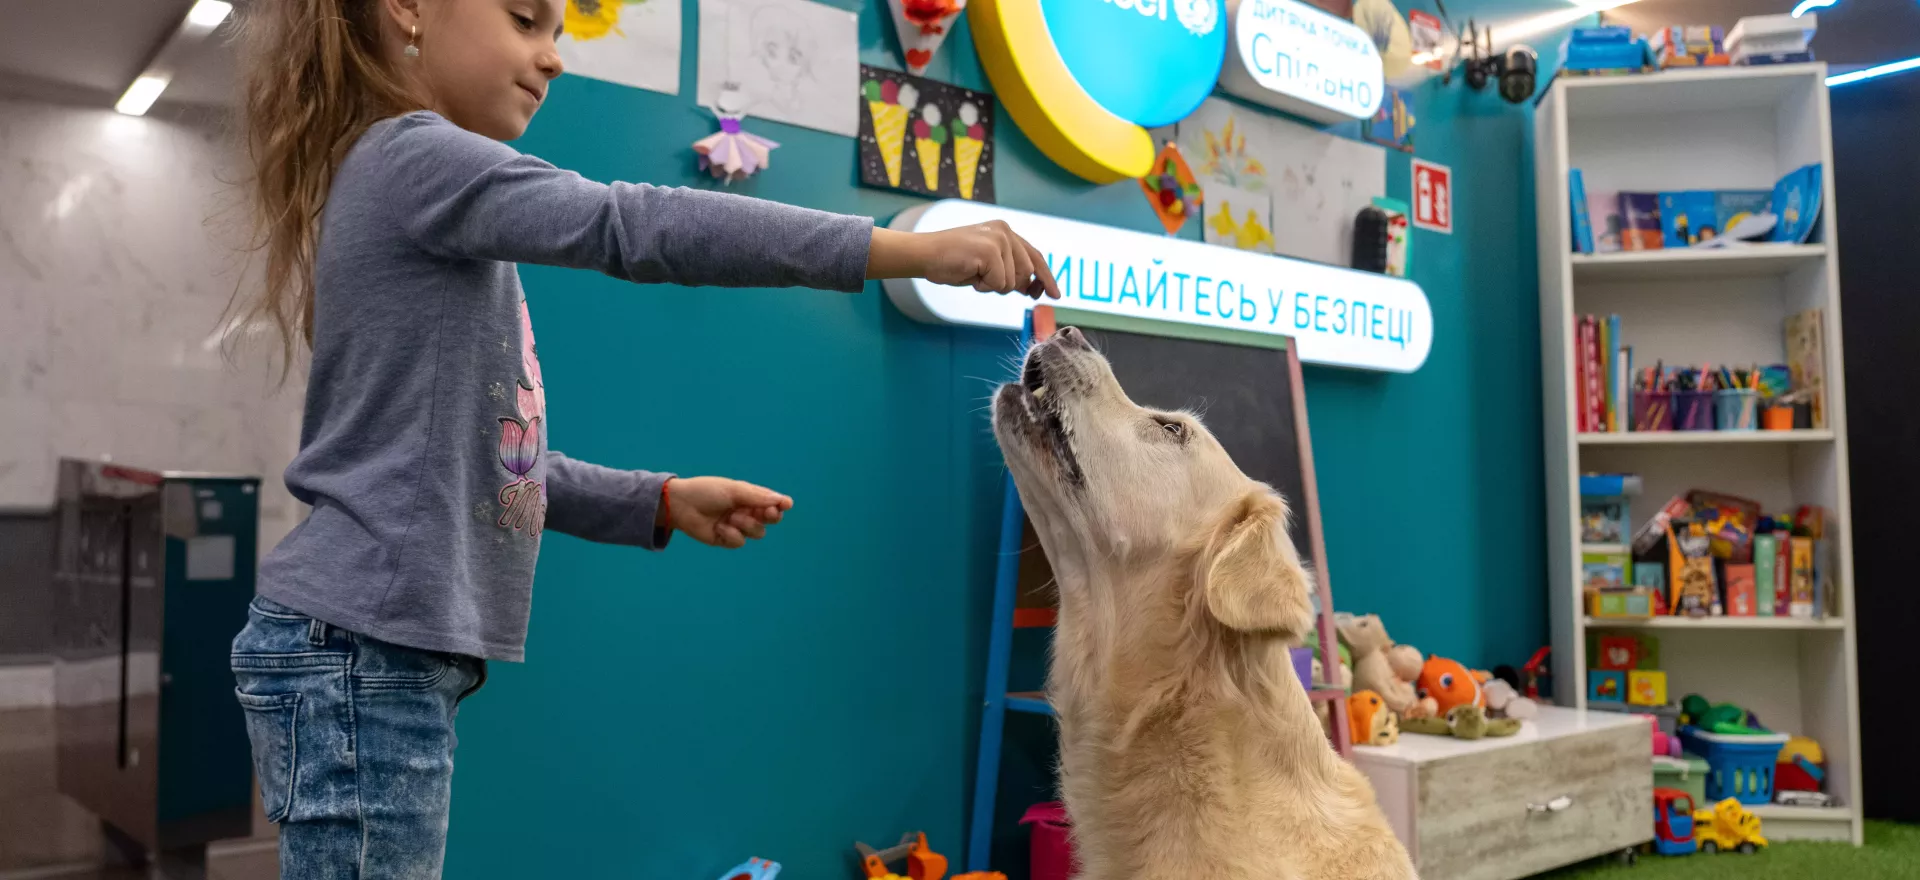 A girl feeds a treat to a dog in a classroom.